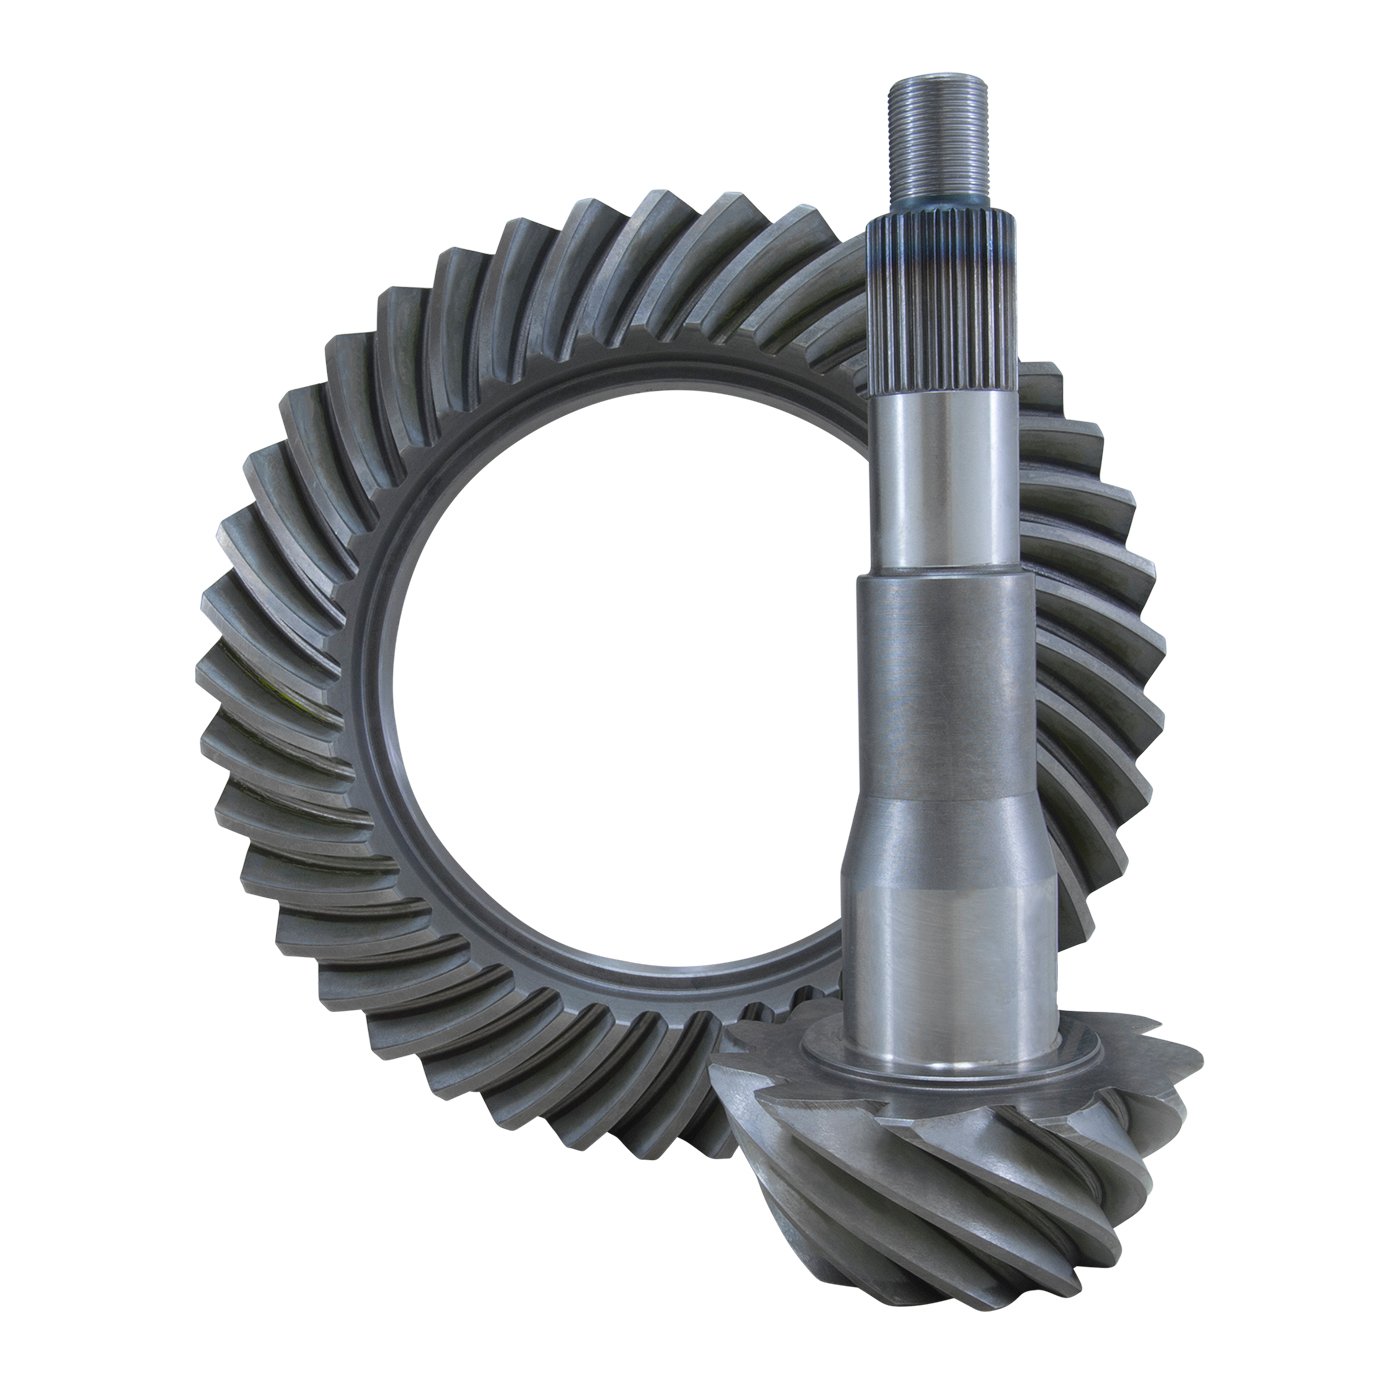 USA Standard 36107 Ring & Pinion Gear Set, For Ford 10.25 in., 4.30 Ratio.